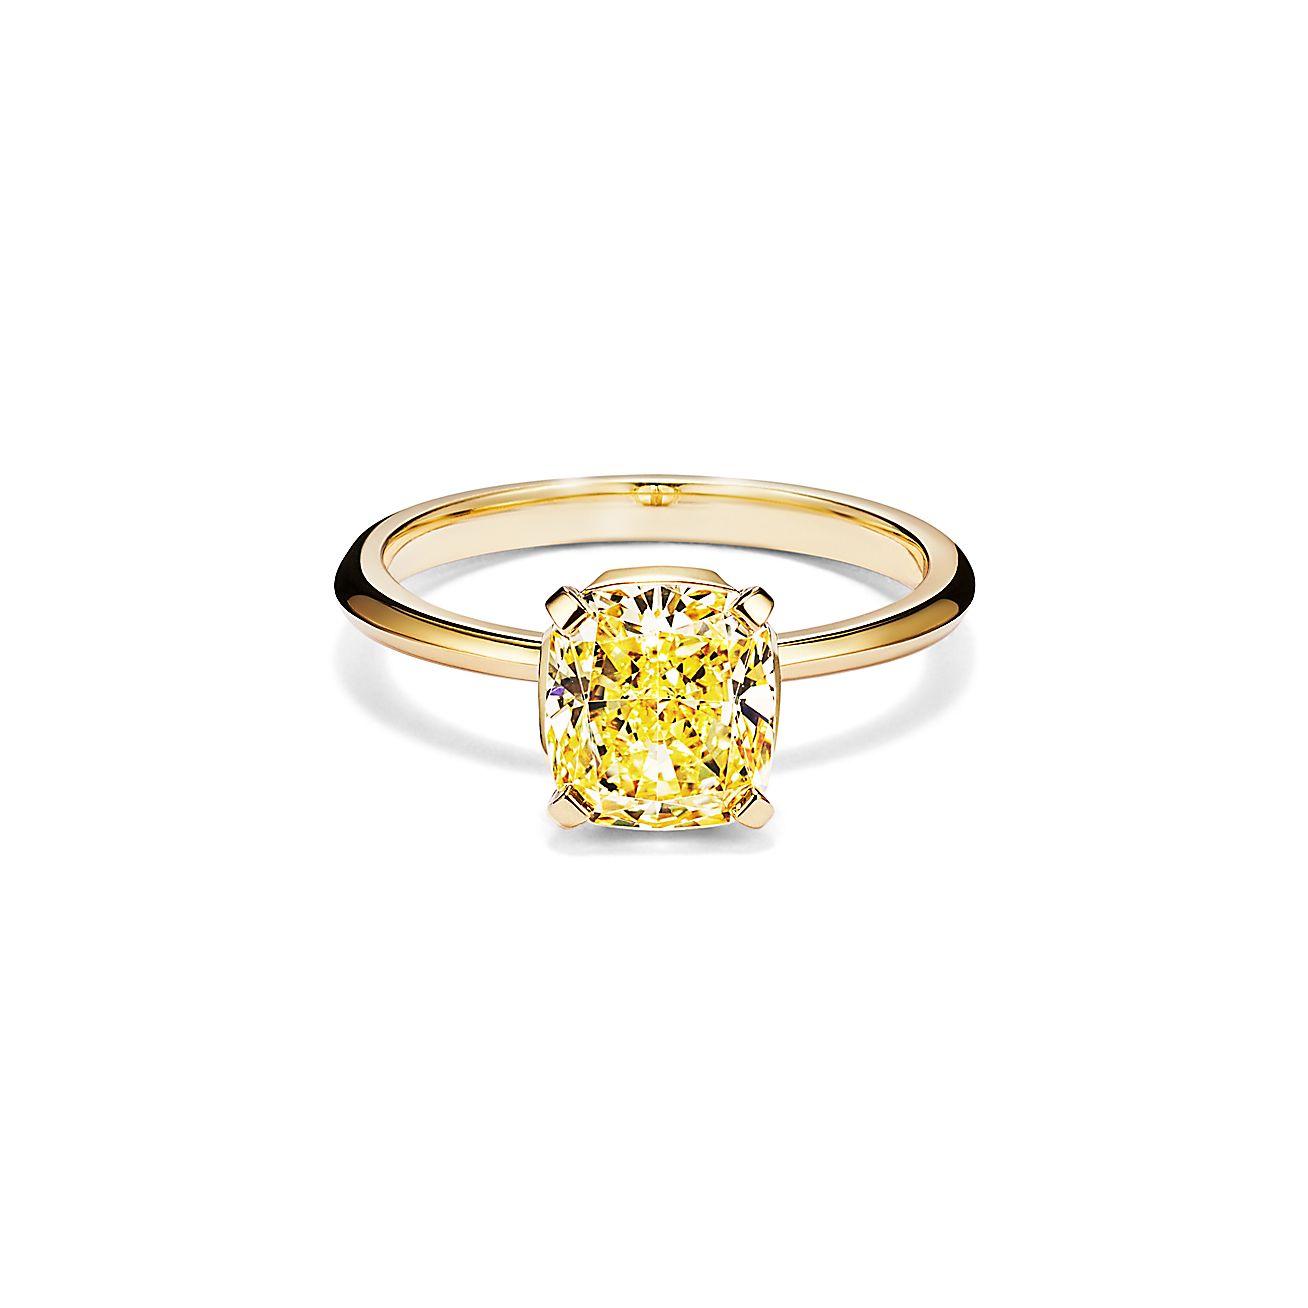 Tiffany And Co Engagement Ring With A Cushion Cut Yellow Diamond In